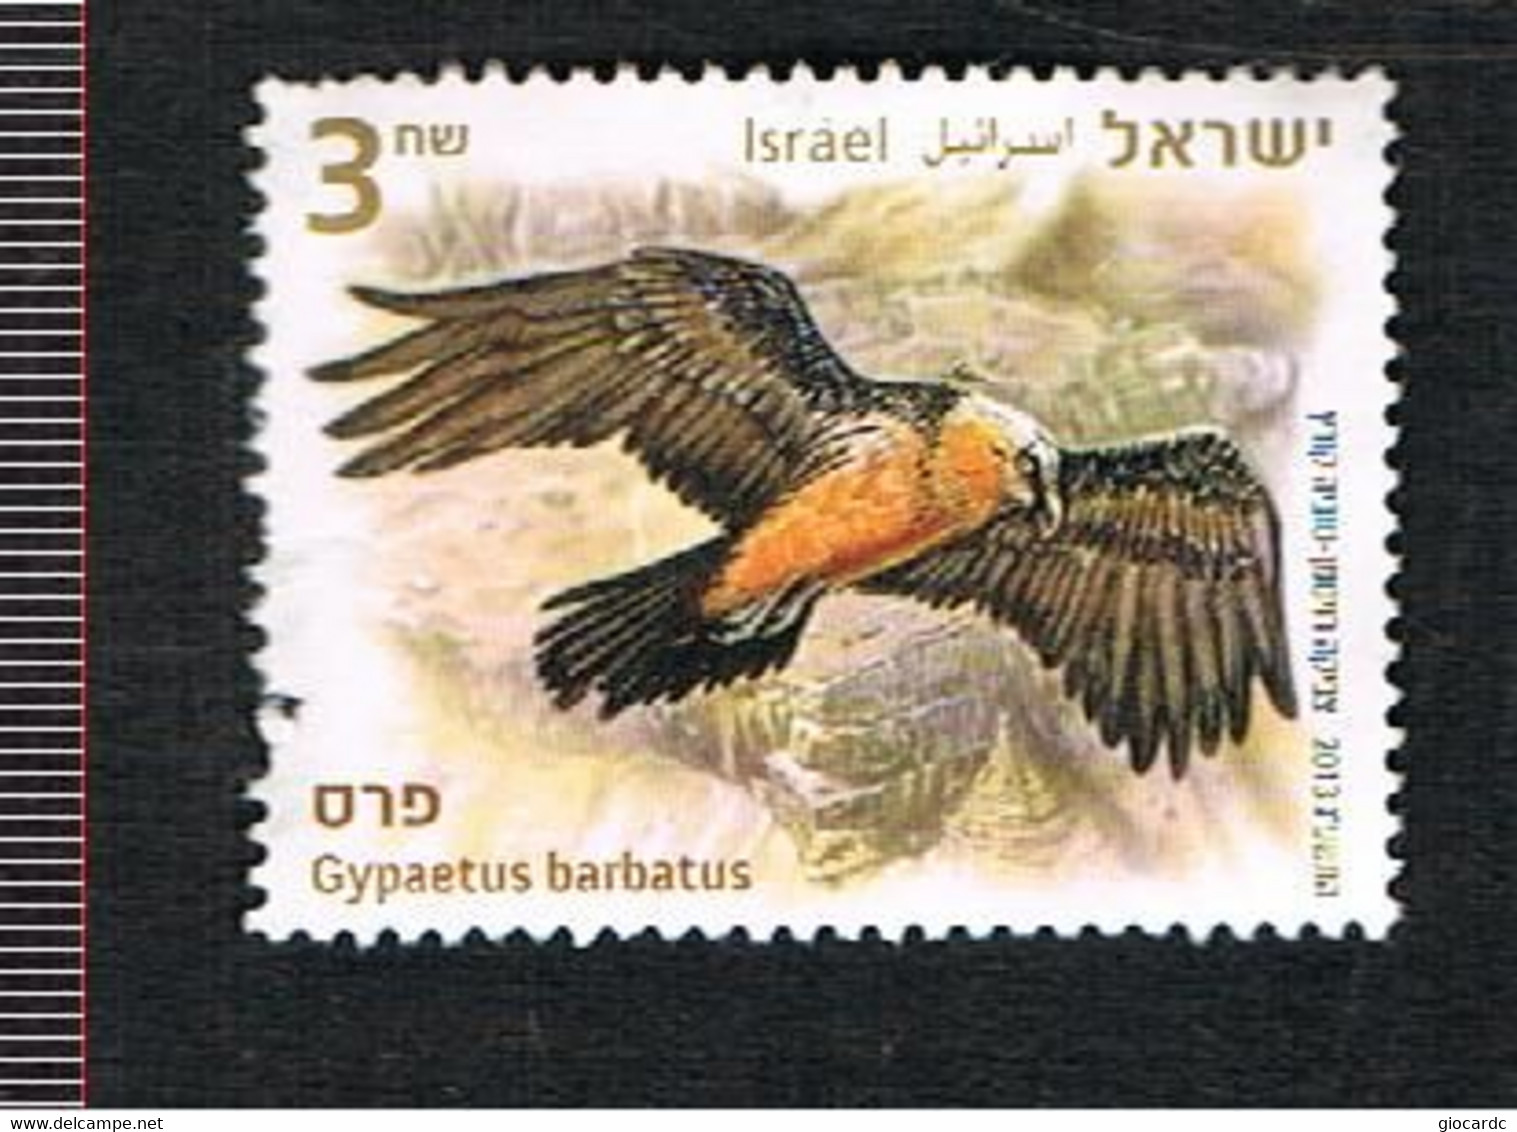 ISRAELE (ISRAEL)  - SG 2209   - 2013 BIRDS OF PREY: GYPAETUS BARBATUS  - USED° WITH LIGHT DEFECT IN PERFORATION - Gebraucht (ohne Tabs)